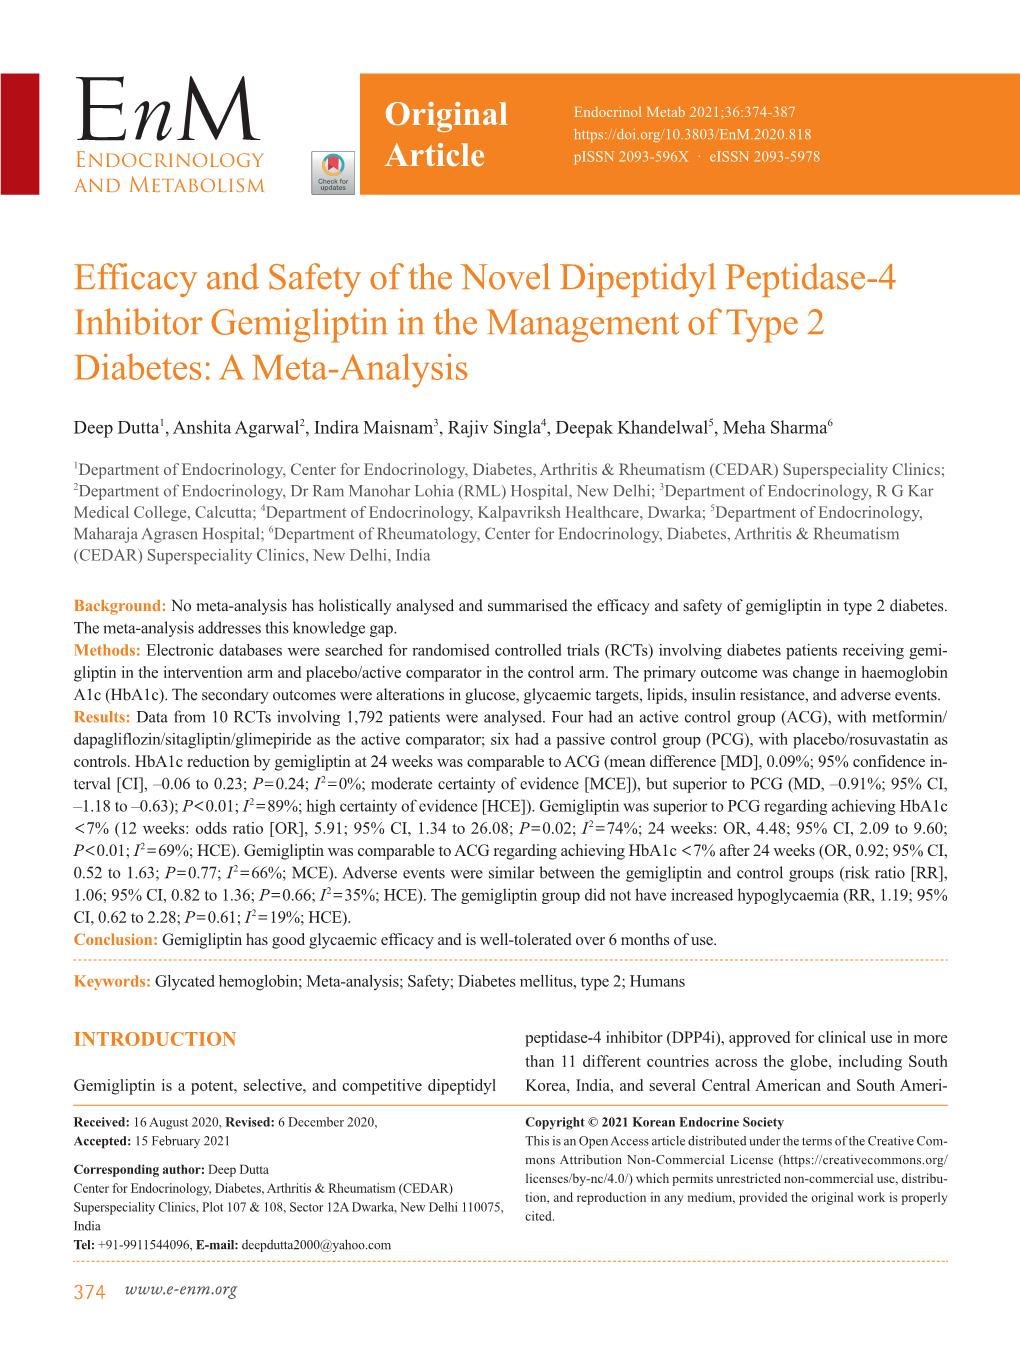 Efficacy and Safety of the Novel Dipeptidyl Peptidase-4 Inhibitor Gemigliptin in the Management of Type 2 Diabetes: a Meta-Analysis